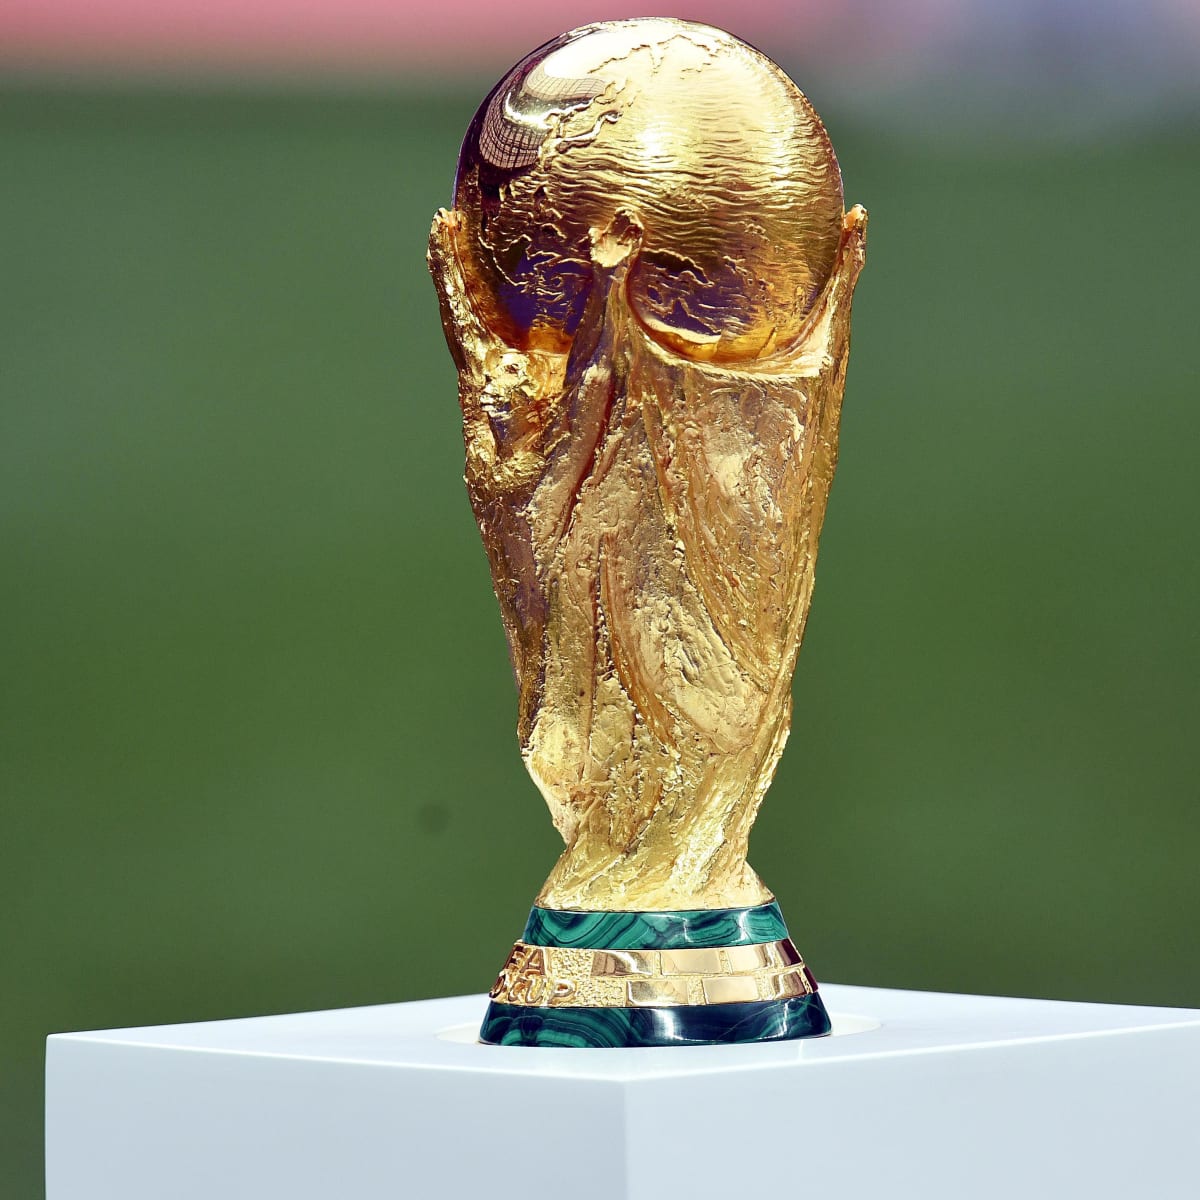 fifa world cup trophy image hd download